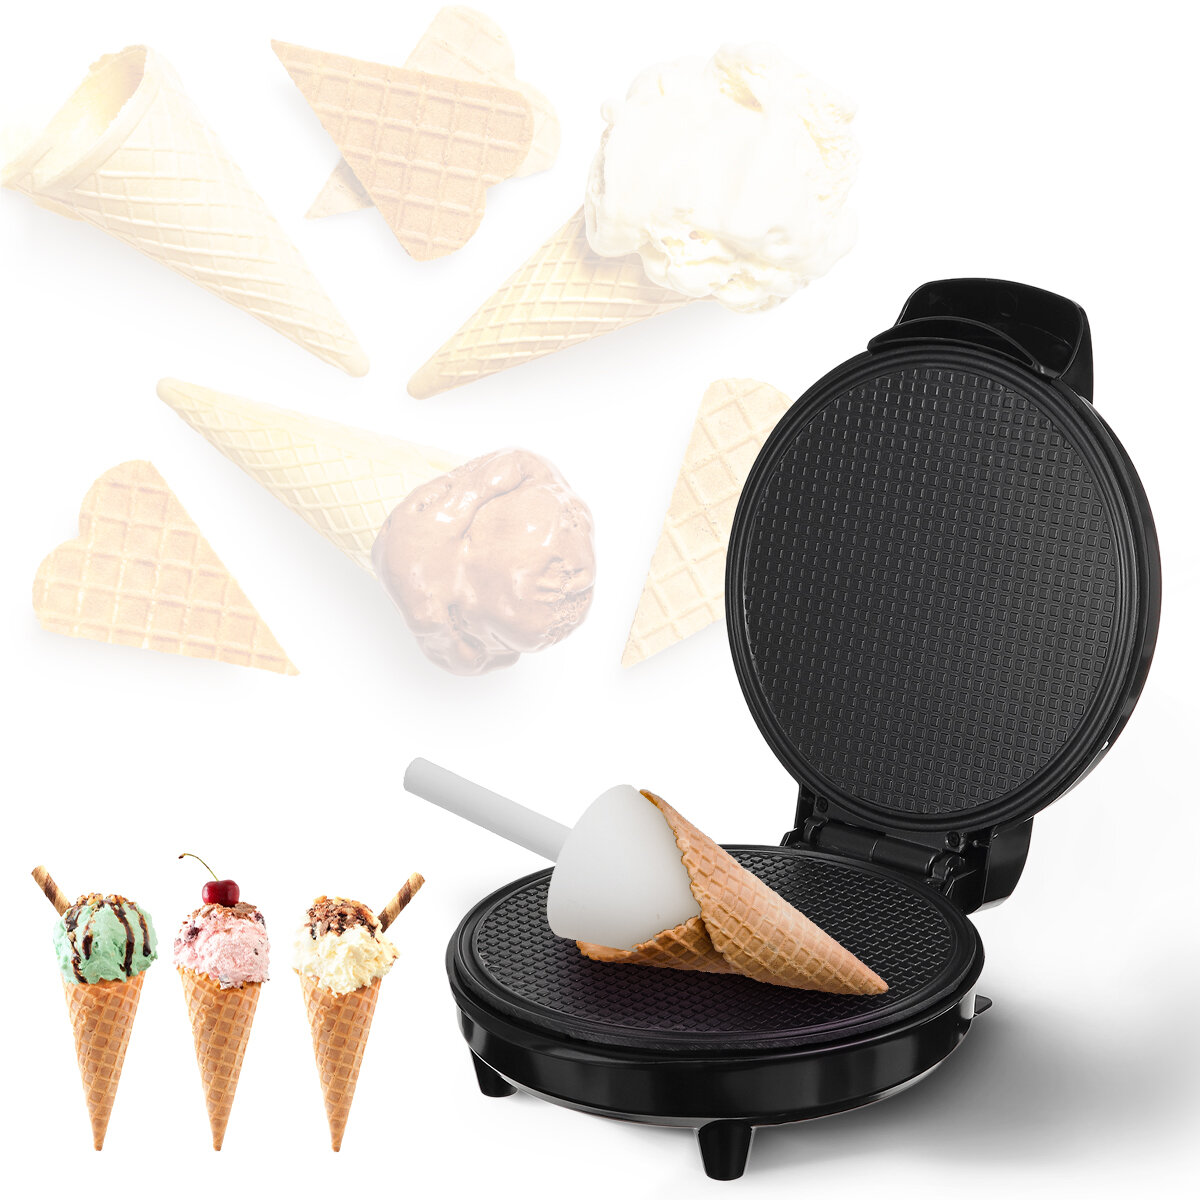 Waffle Cone and Bowl Maker Includes Shaper Roller and Bowl Press Homemade Ice Cream Cone Iron Machine Holiday Gift Giving or Entertaining Fun